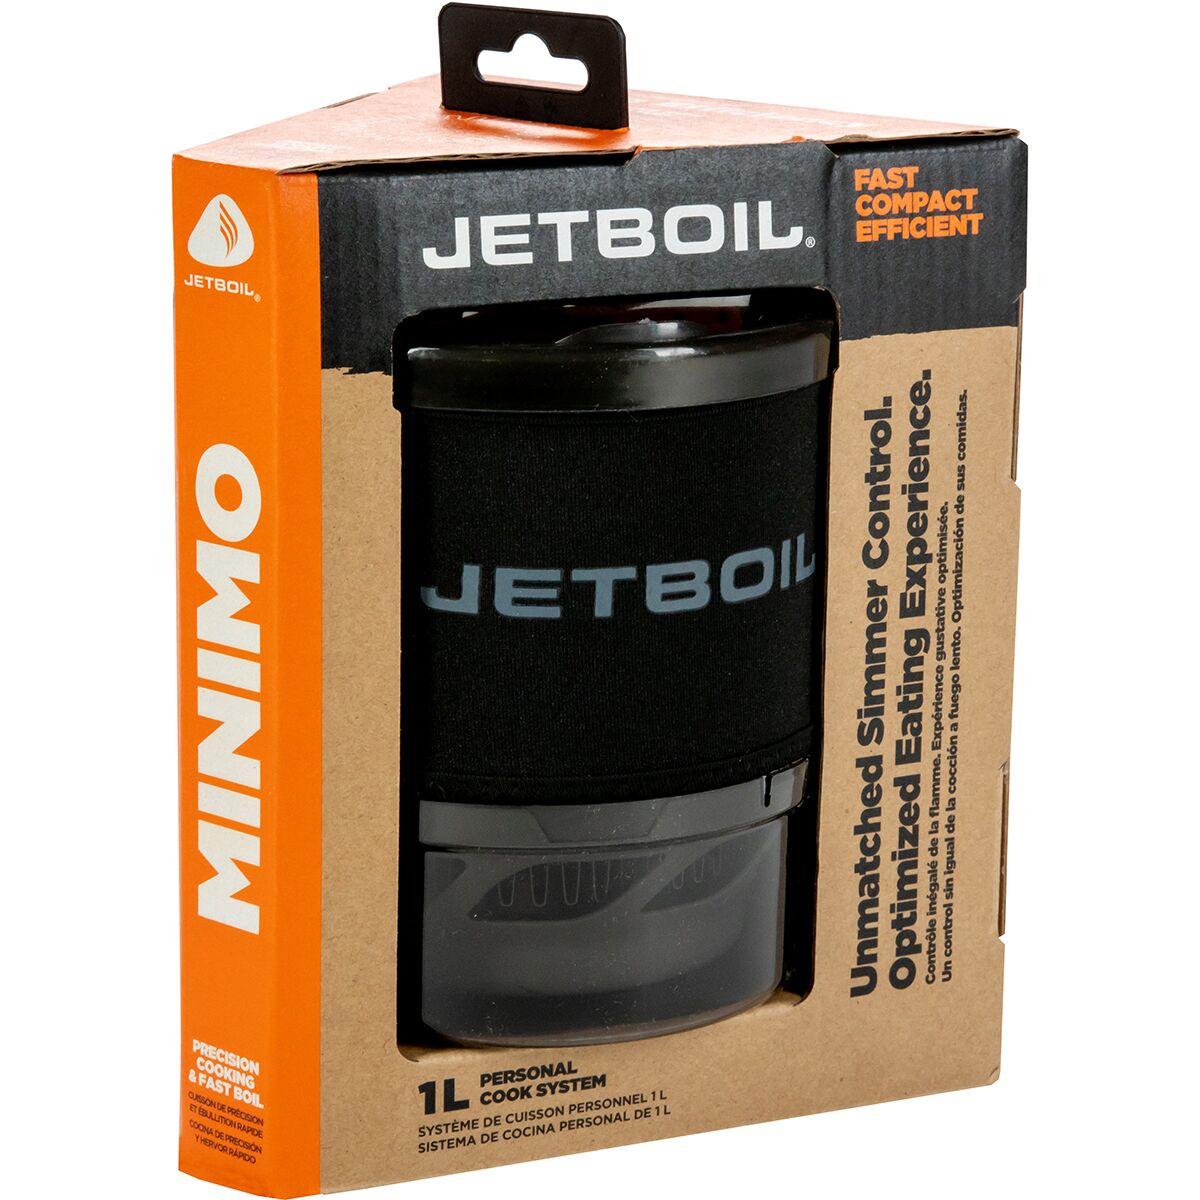  Jetboil MiniMo Cooking System - Hike & Camp